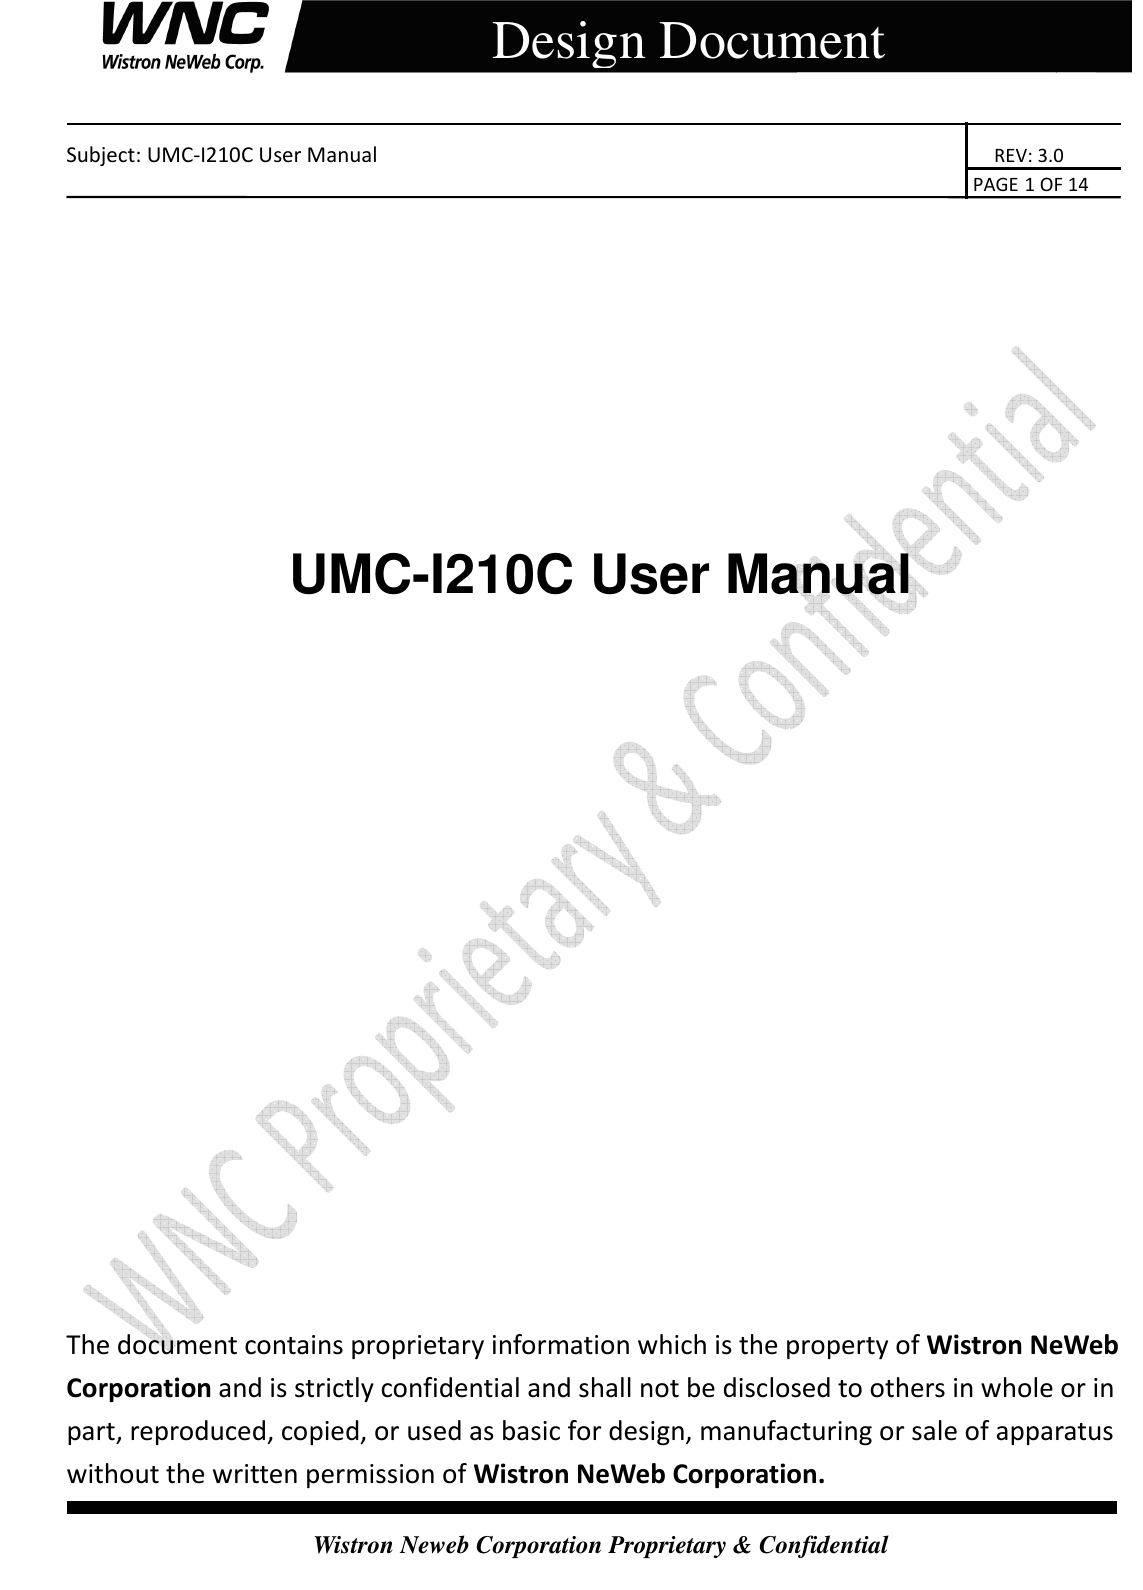    Subject: UMC-I210C User Manual                                                                       REV: 3.0                                                                                                                                                                               PAGE 1 OF 14  Wistron Neweb Corporation Proprietary &amp; Confidential     Design Document          UMC-I210C User Manual                    The document contains proprietary information which is the property of Wistron NeWeb Corporation and is strictly confidential and shall not be disclosed to others in whole or in part, reproduced, copied, or used as basic for design, manufacturing or sale of apparatus without the written permission of Wistron NeWeb Corporation. 